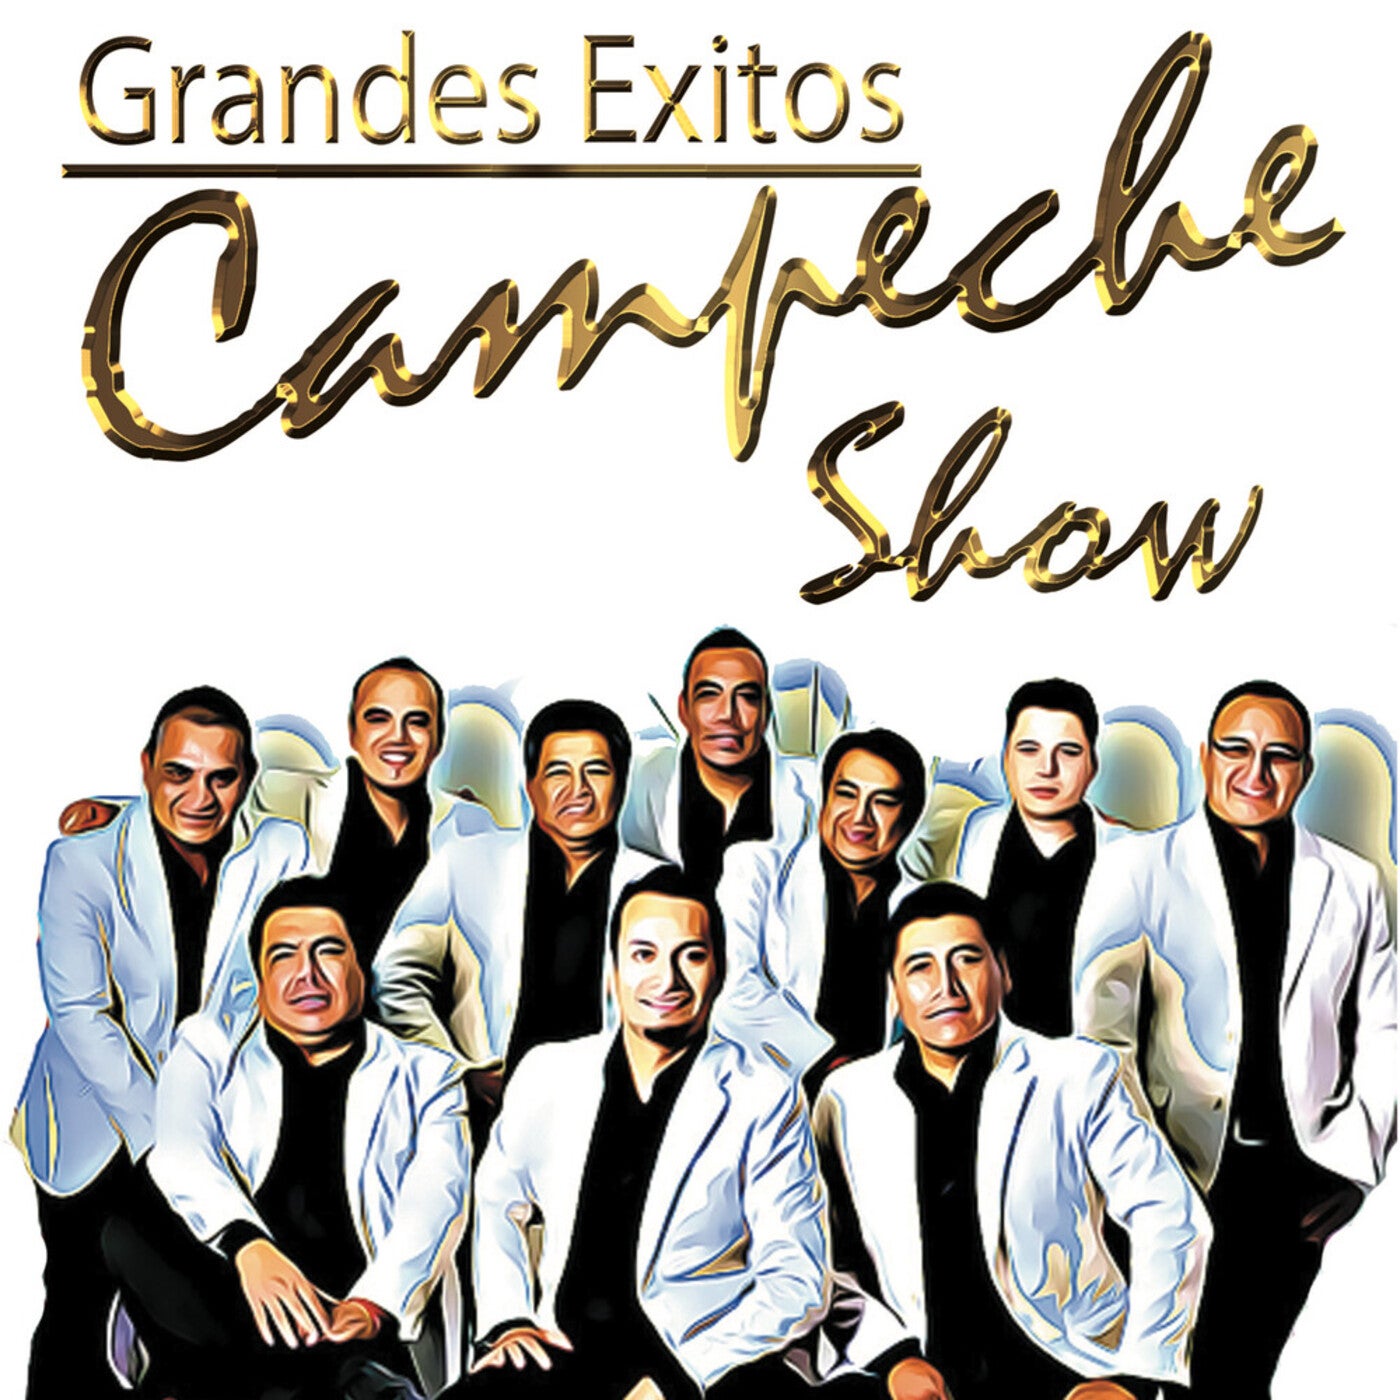 Grandes Exitos by Campeche Show on Beatsource